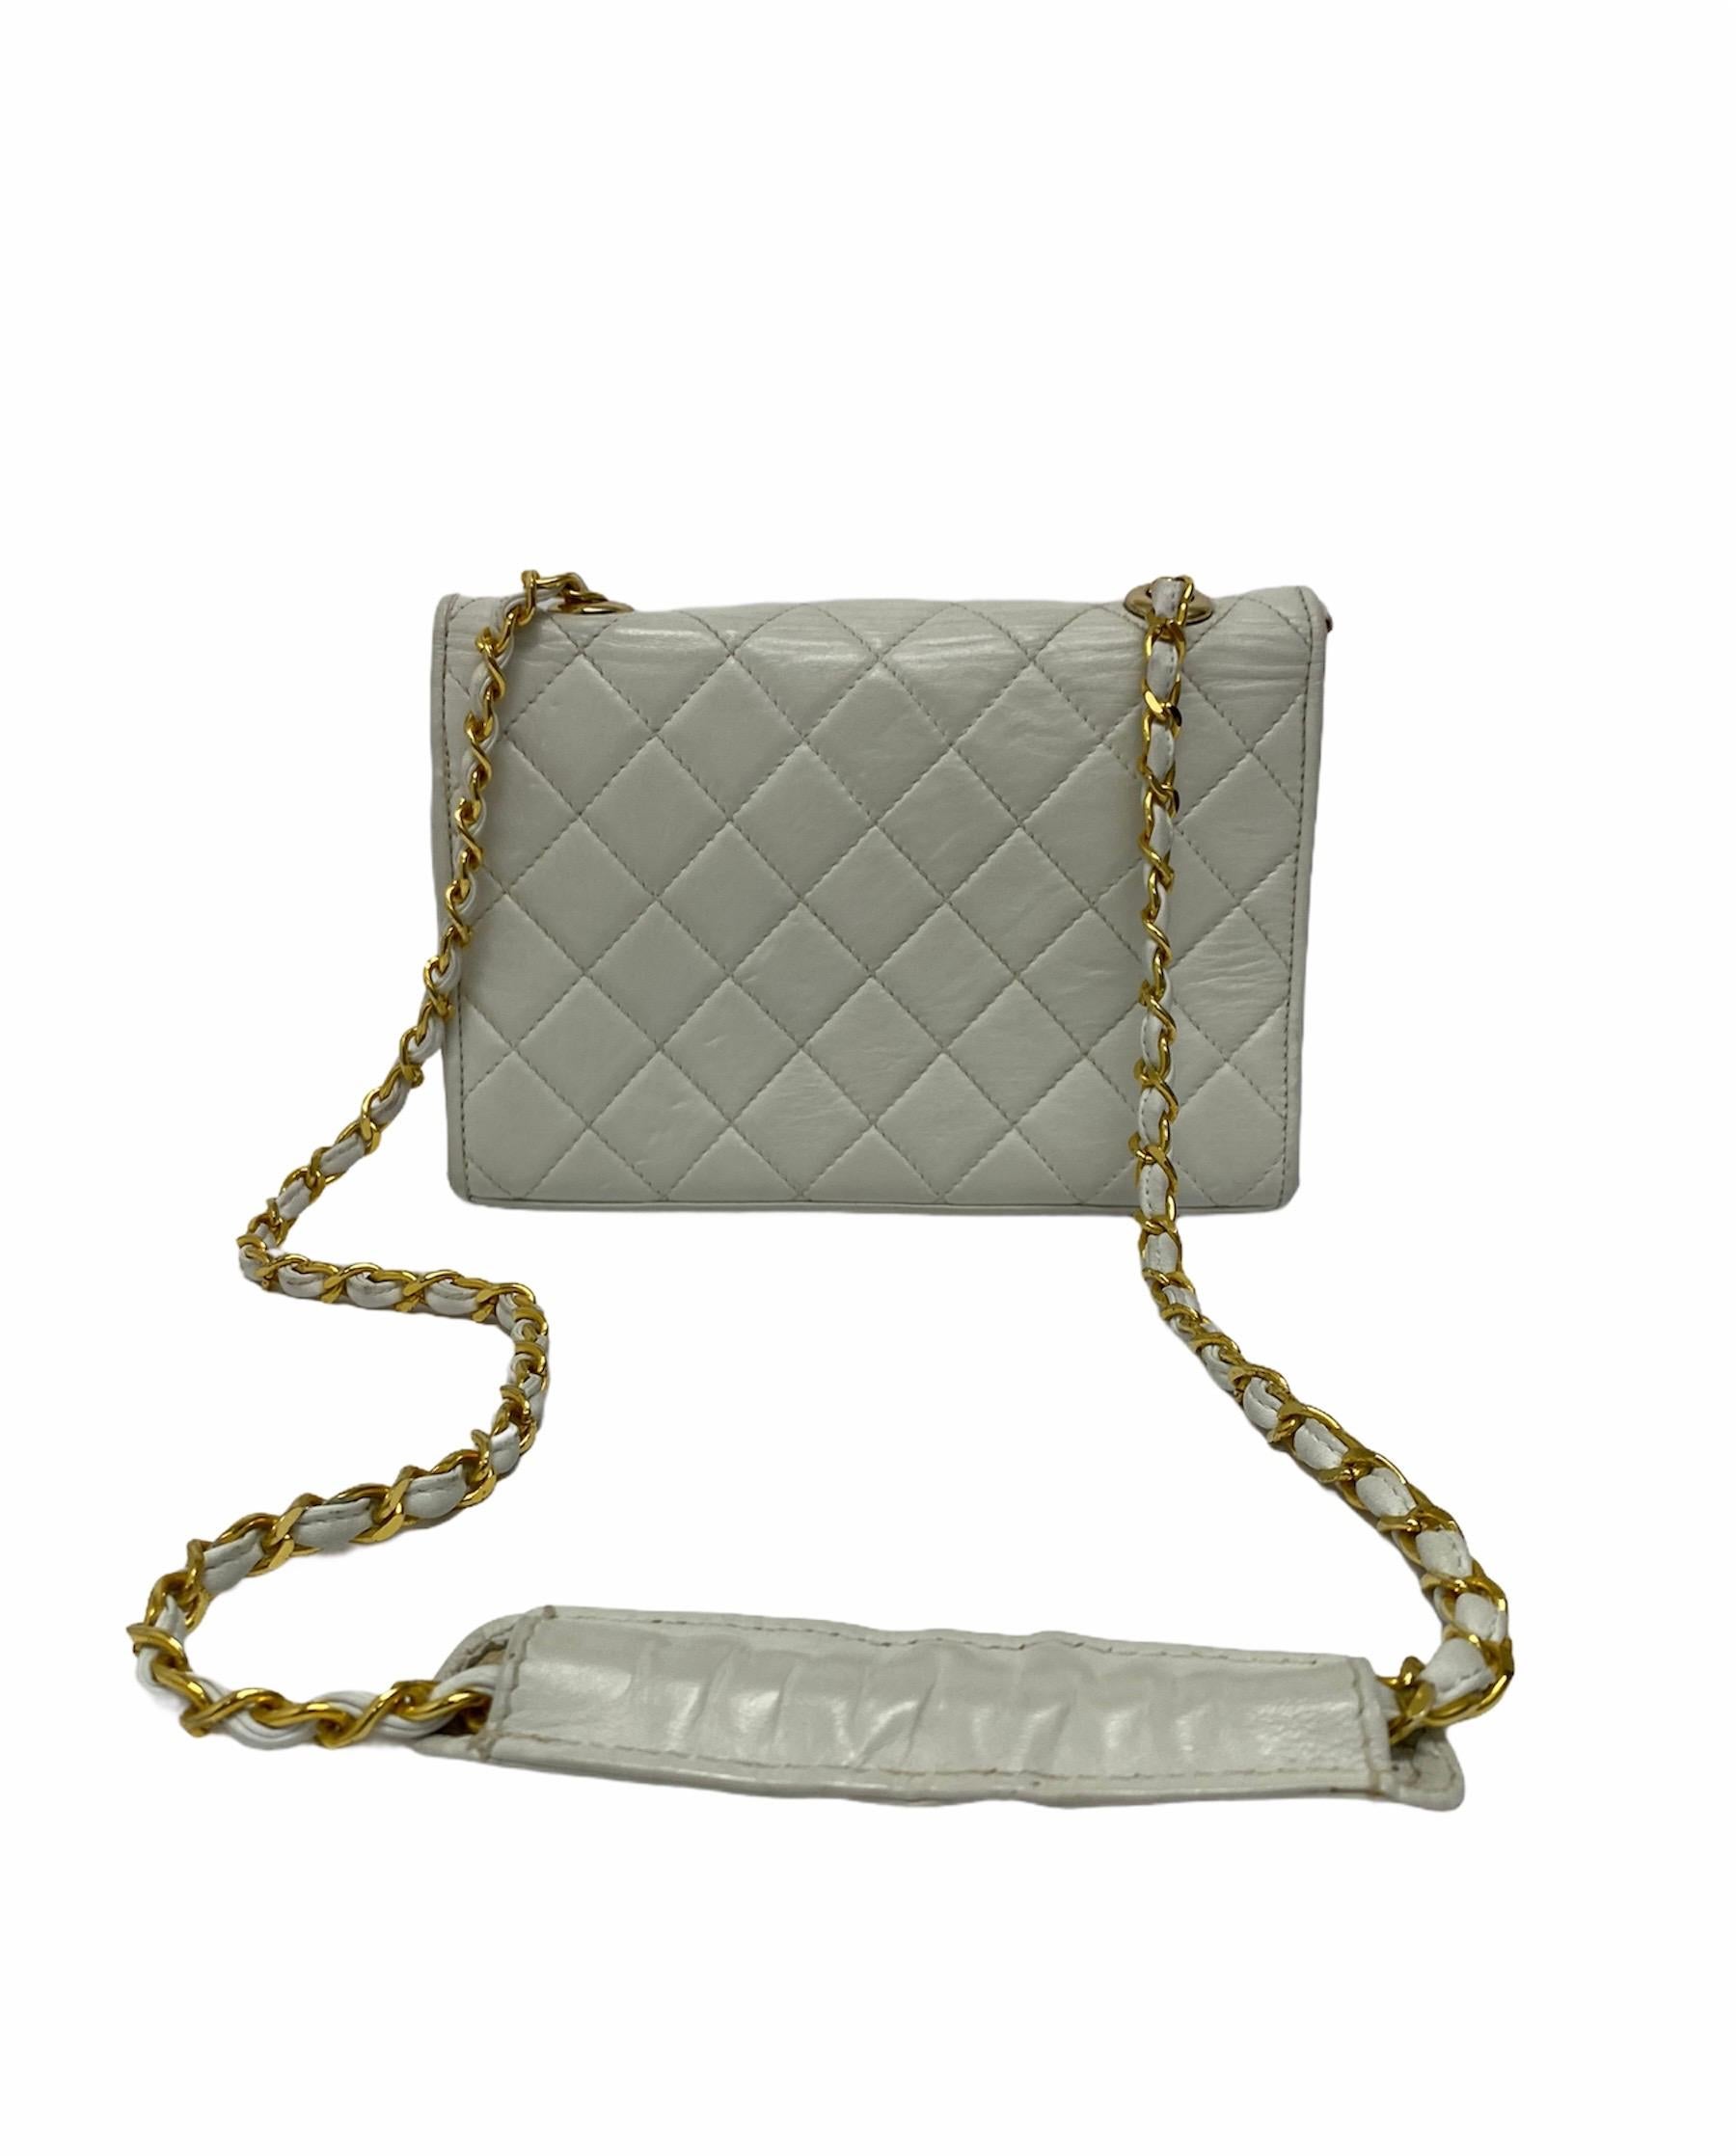 Women's Chanel White Leather Bag